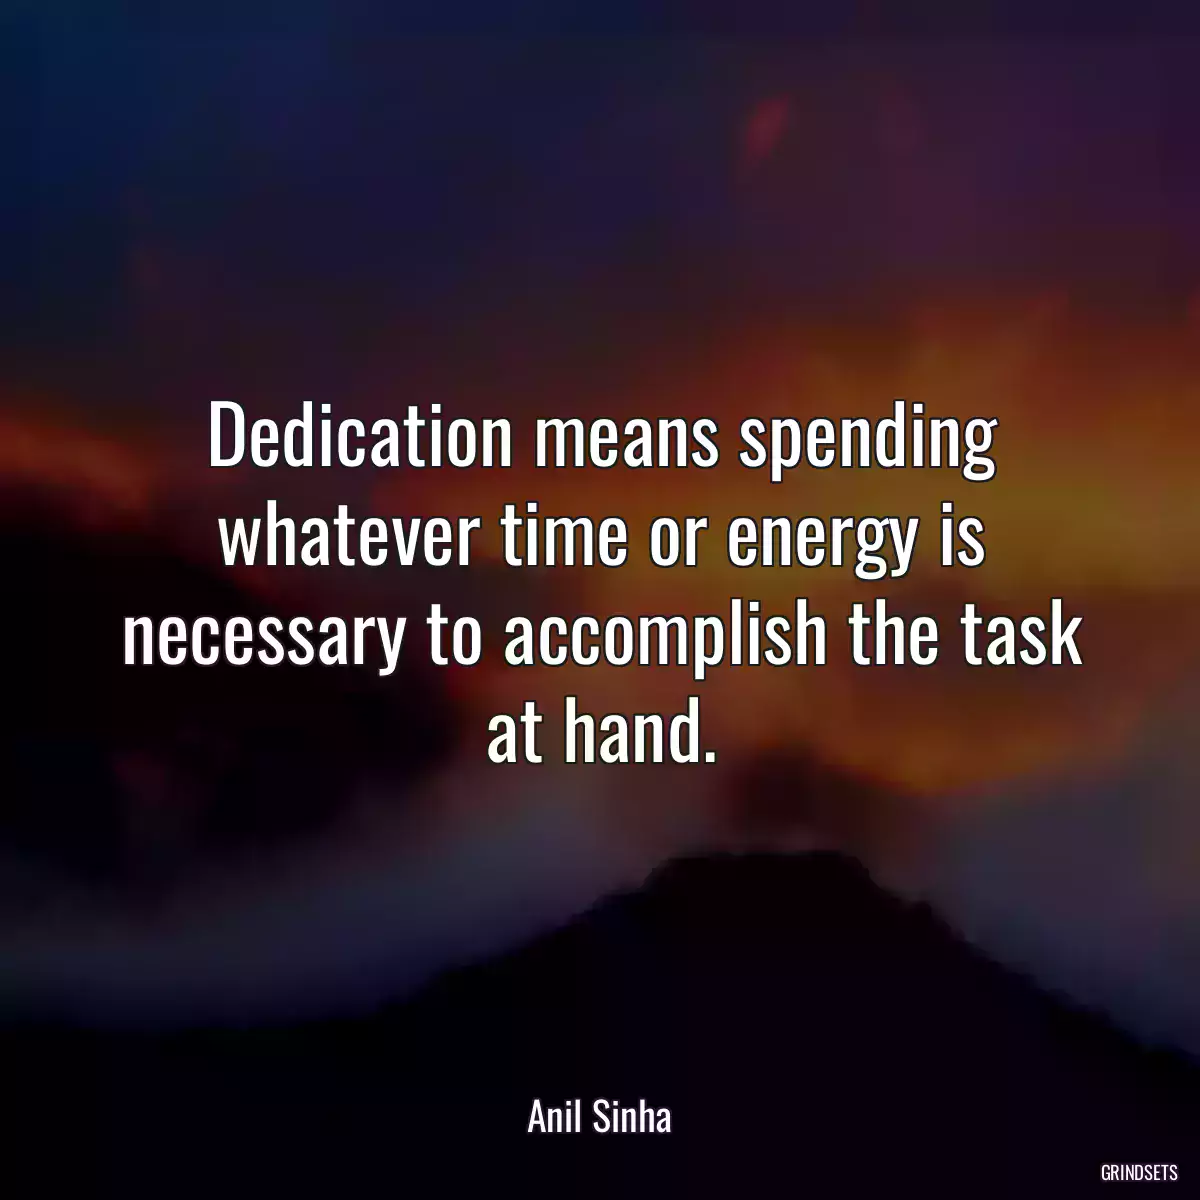 Dedication means spending whatever time or energy is necessary to accomplish the task at hand.